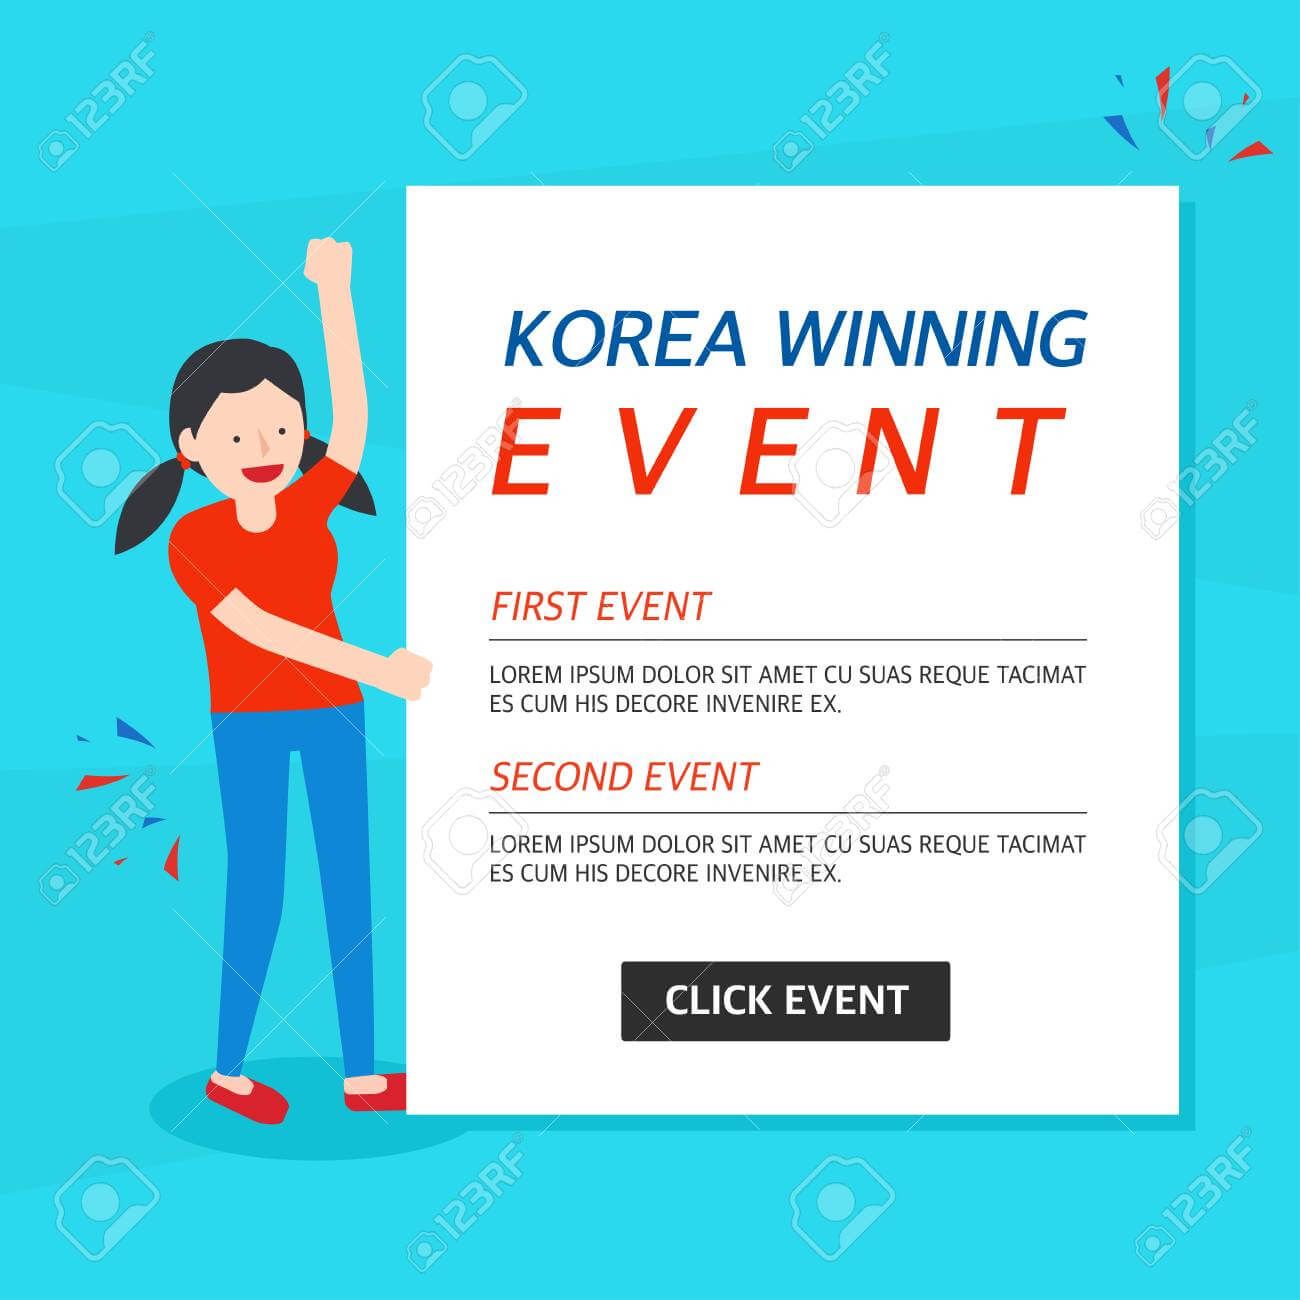 Korea Winning Event Banner Template With Event Banner Template